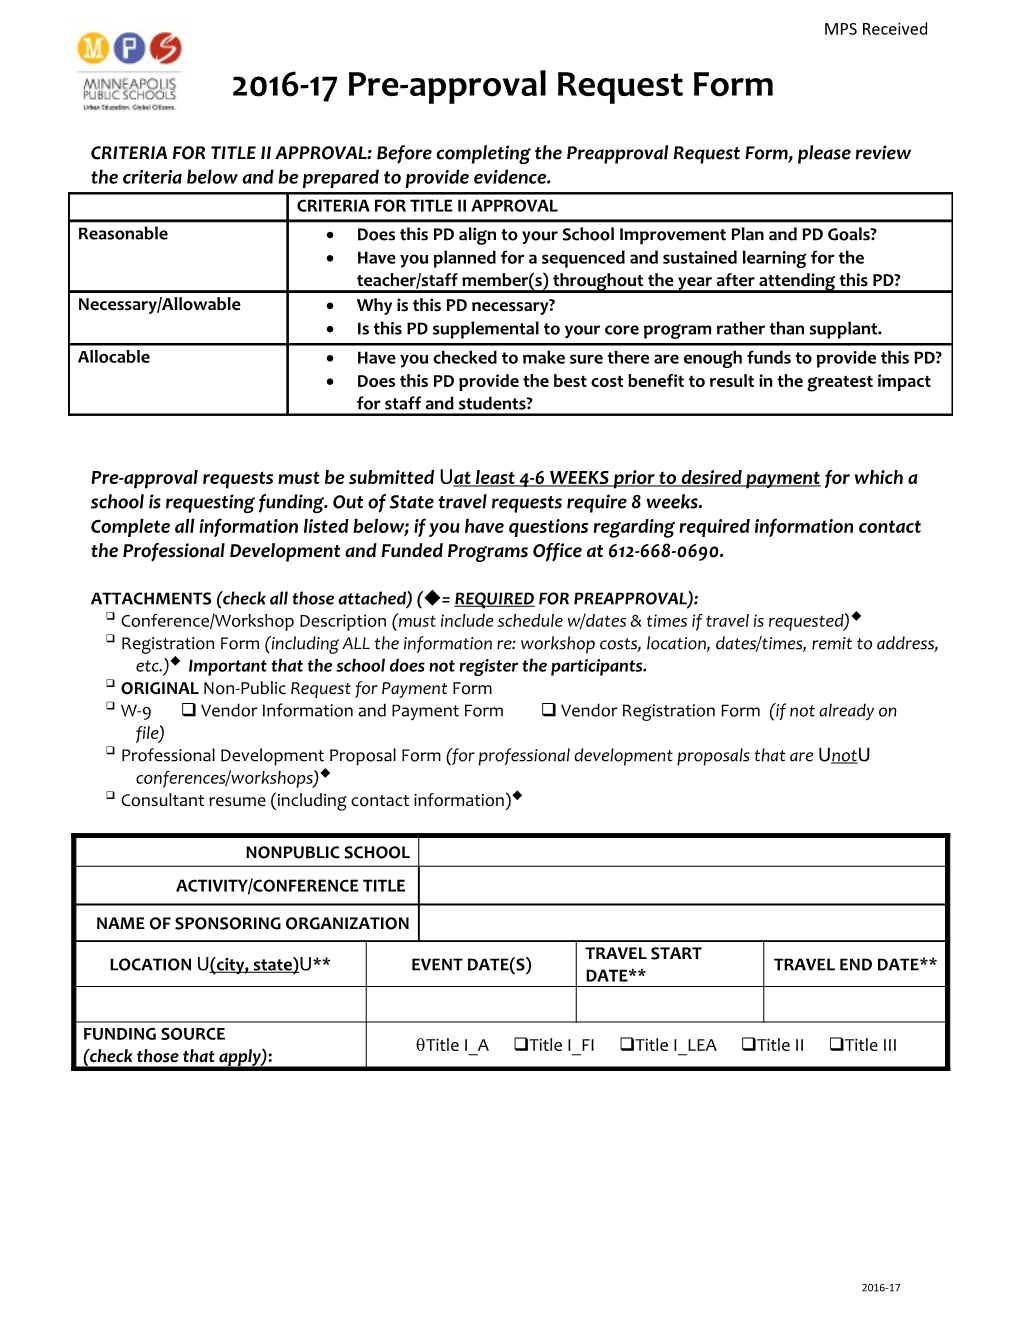 2016-17 Pre-Approval Request Form